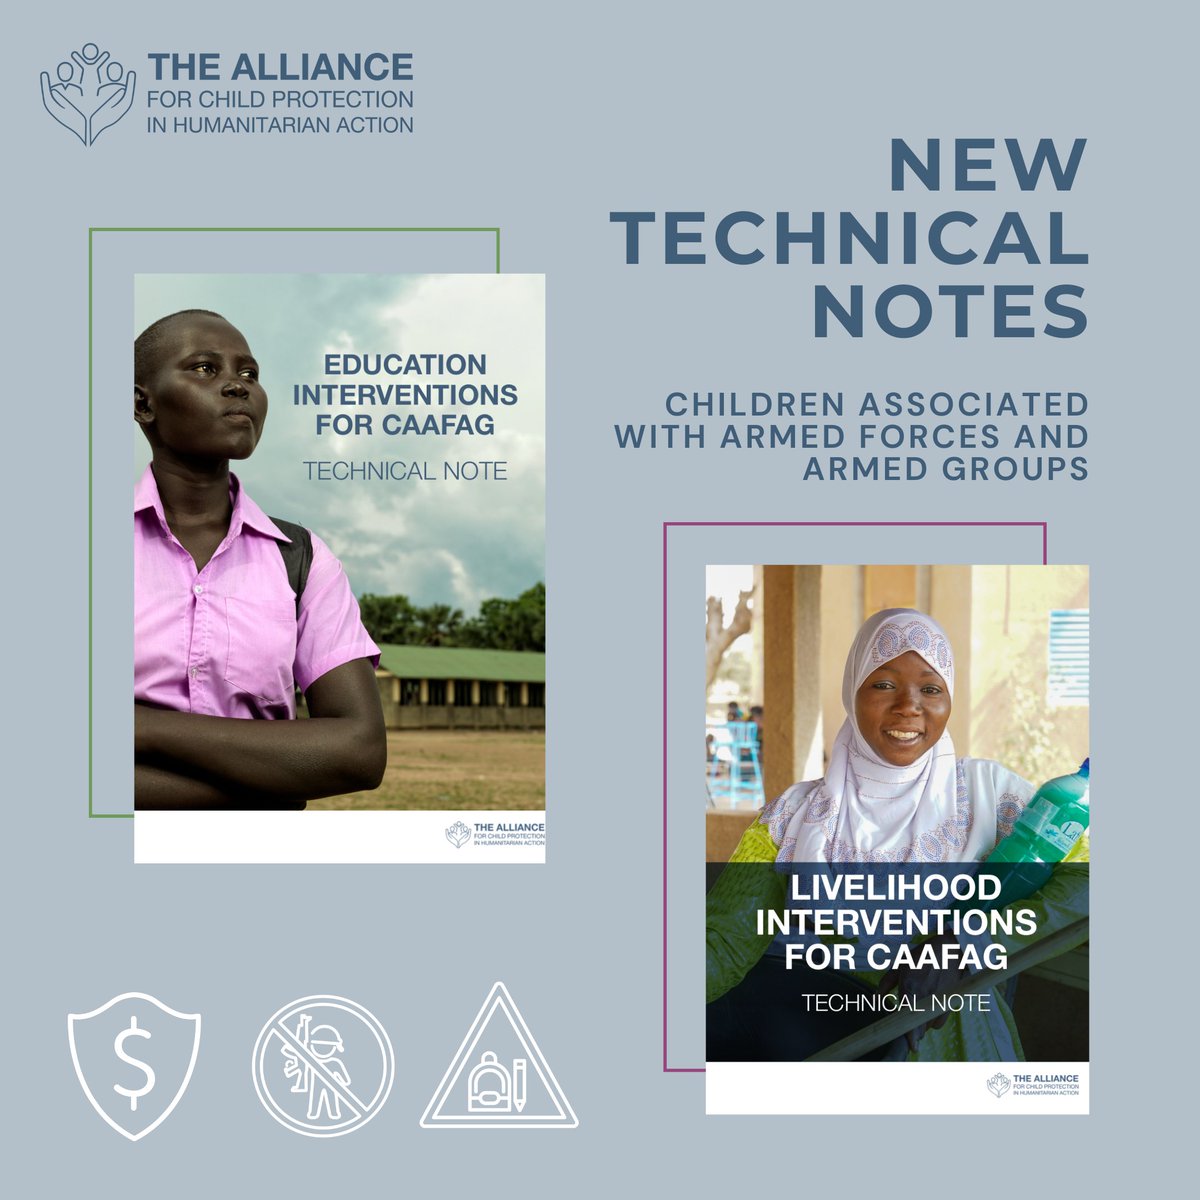 Exciting News! 📢 New Technical Notes on CAAFAG and Working Across Sectors. Dive into these resources on impactful #Livelihood and #Education interventions for #CAAFAG.

Find these technical notes here ➡ alliancecpha.org/en/children-as…
#ChildProtection #WorkingAcrossSectors